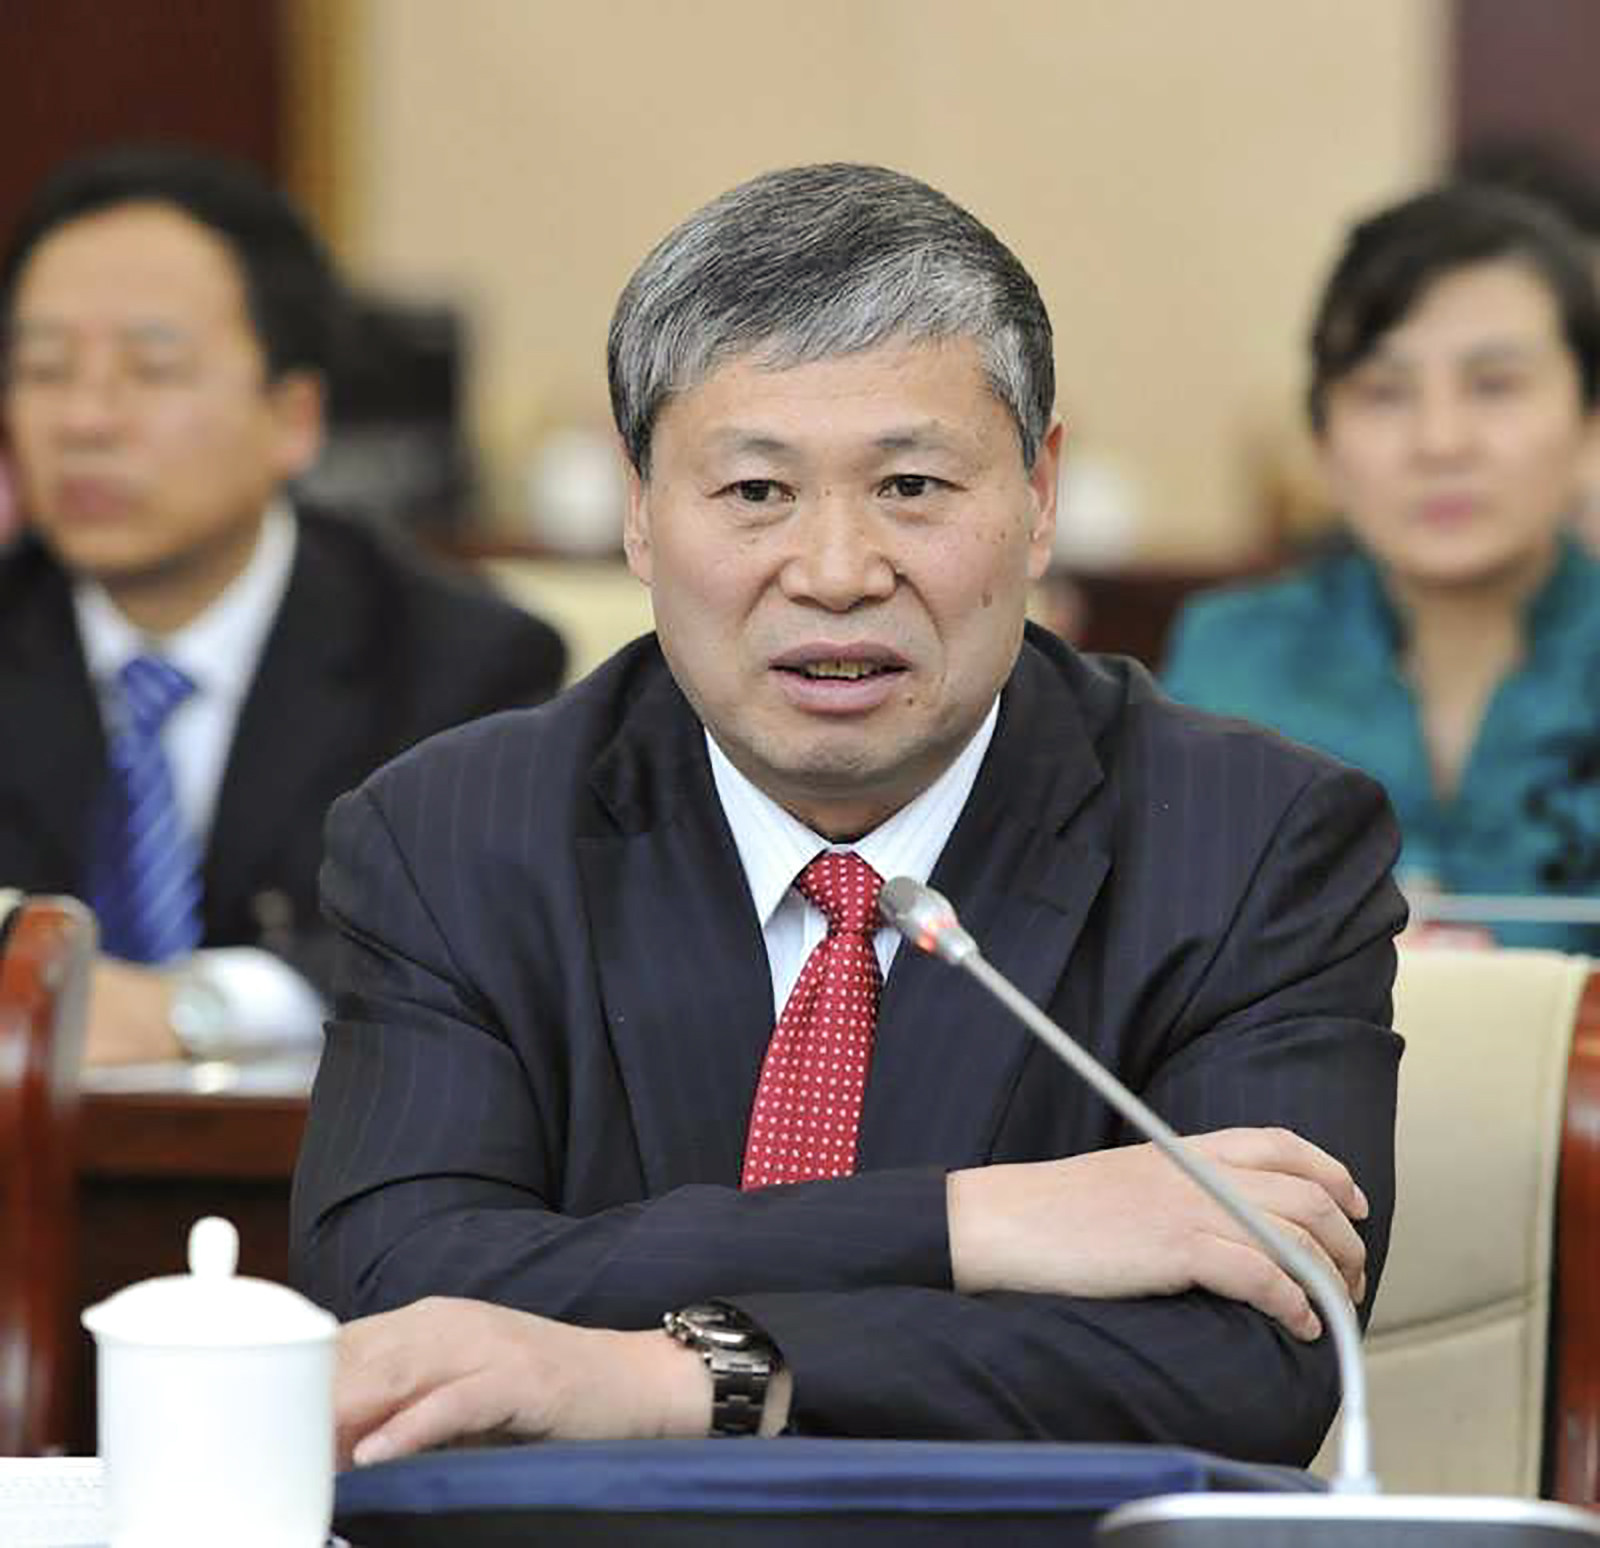 The Supreme People’s Procuratorate has decided to formally arrest Hu Yifeng, a previous president of the Inner Mongolia autonomous region Higher People’s Court, over bribery allegations and other accusations. Photo: Handout